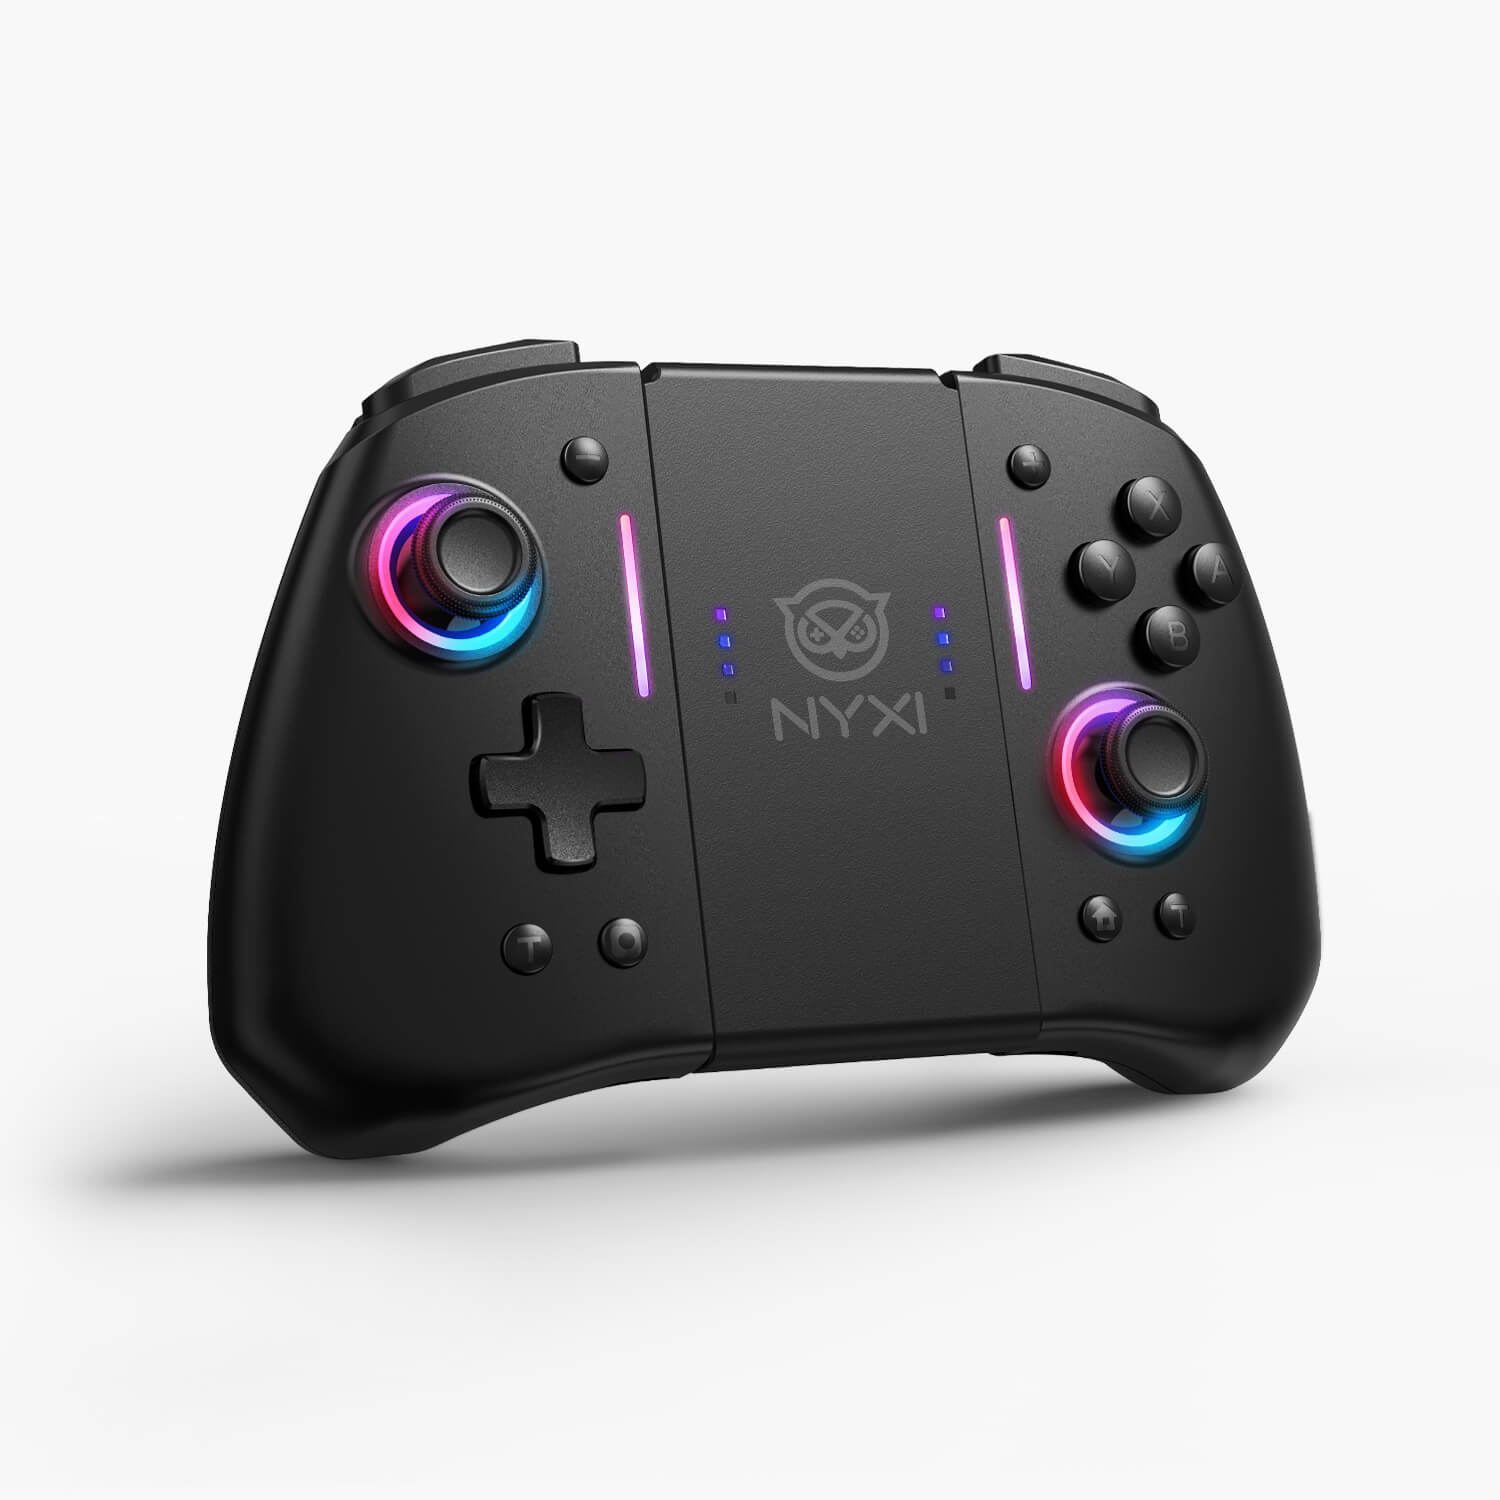 NYXI HYPERION WIRELESS JOY-PAD CONTROLLER - Easy Games